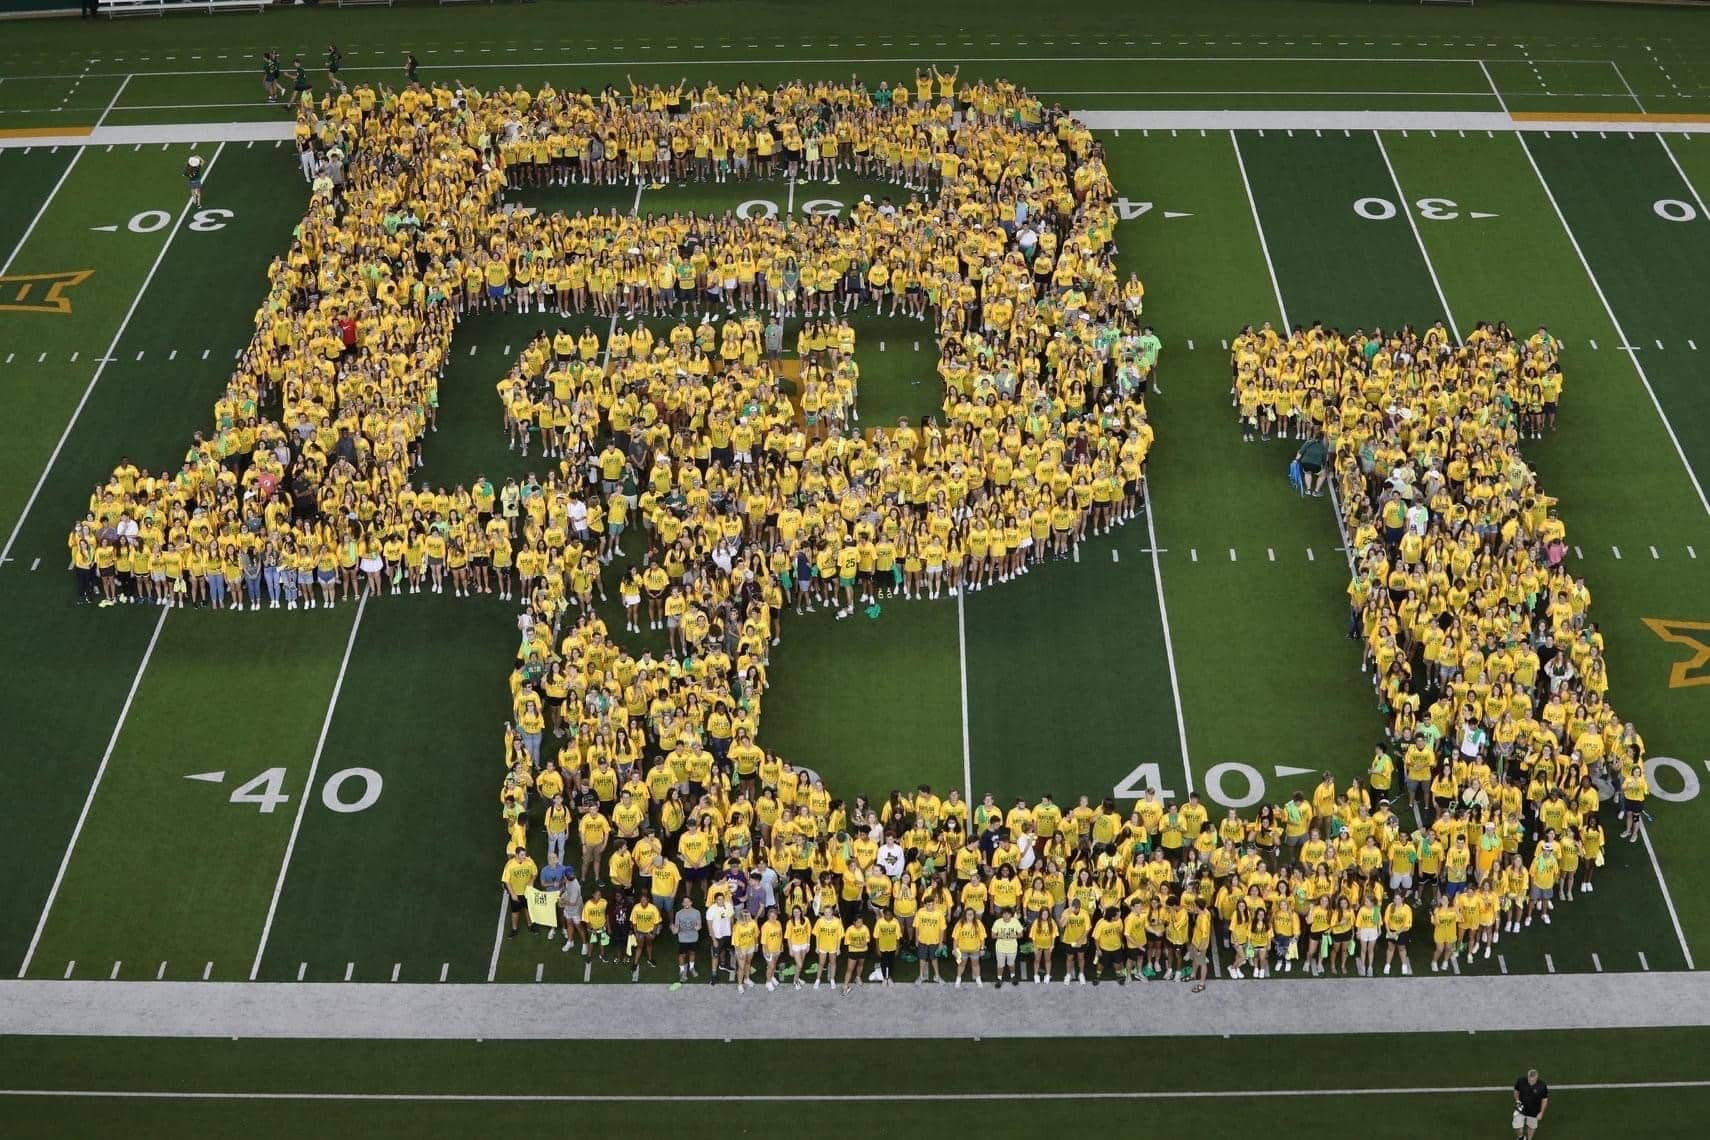 Baylor students forming BU on football field